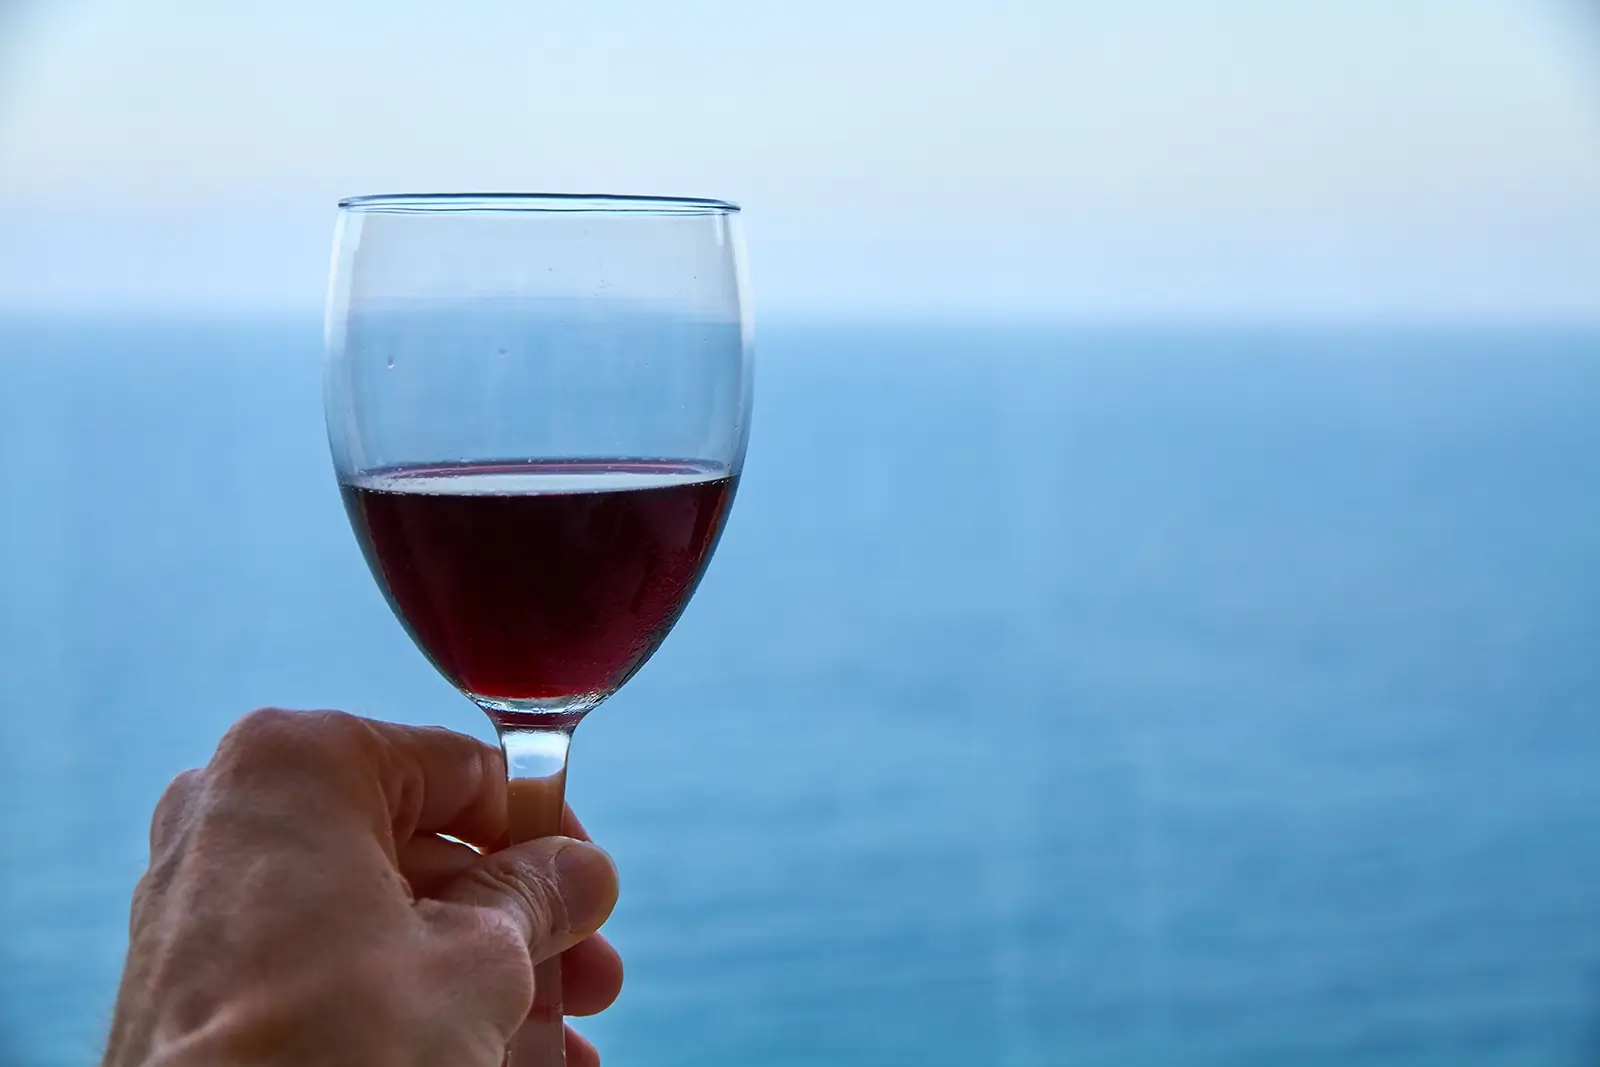 hand holding a wine glass in front of the ocean